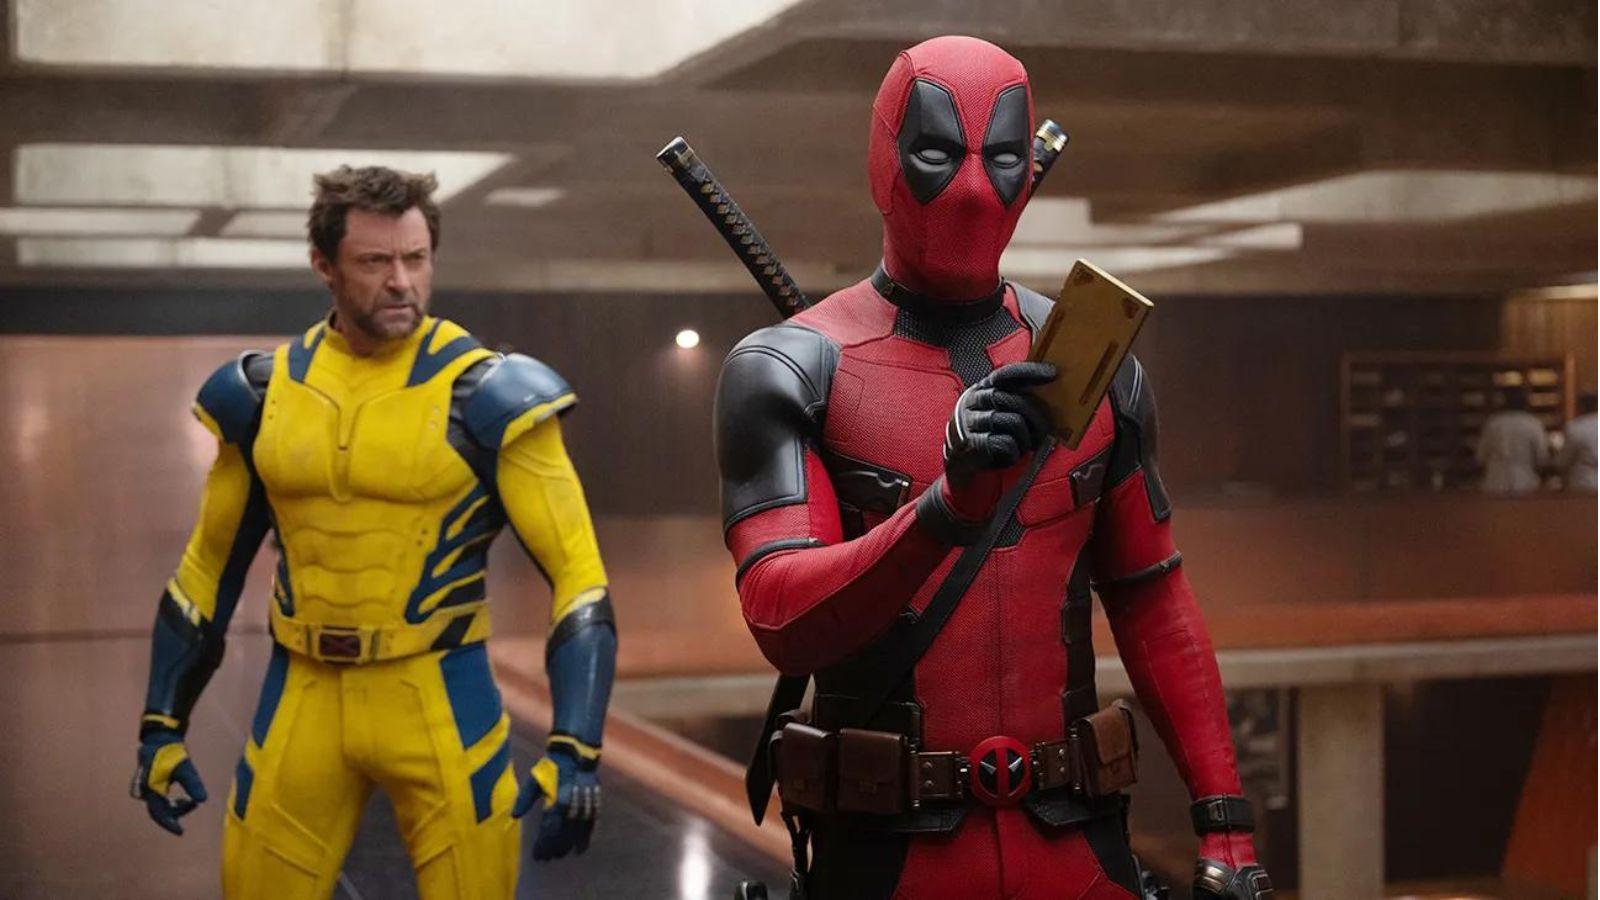 A still from the Deadpool & Wolverine trailer